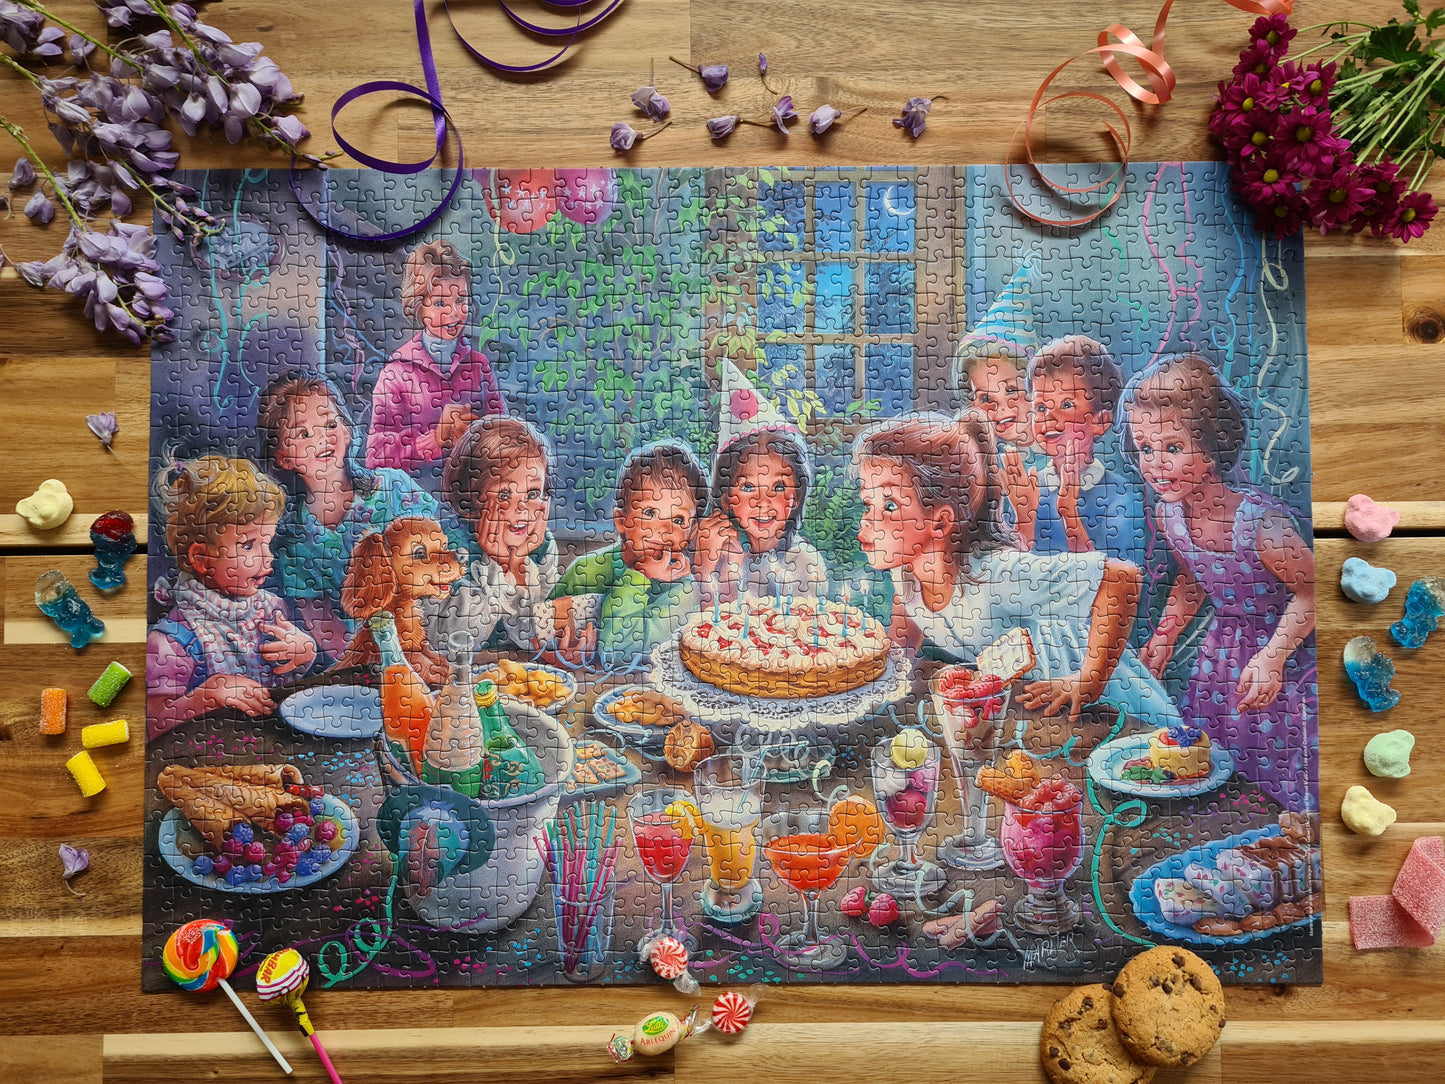 Puzzle n#8 Martine "The birthday party" 1000 pieces